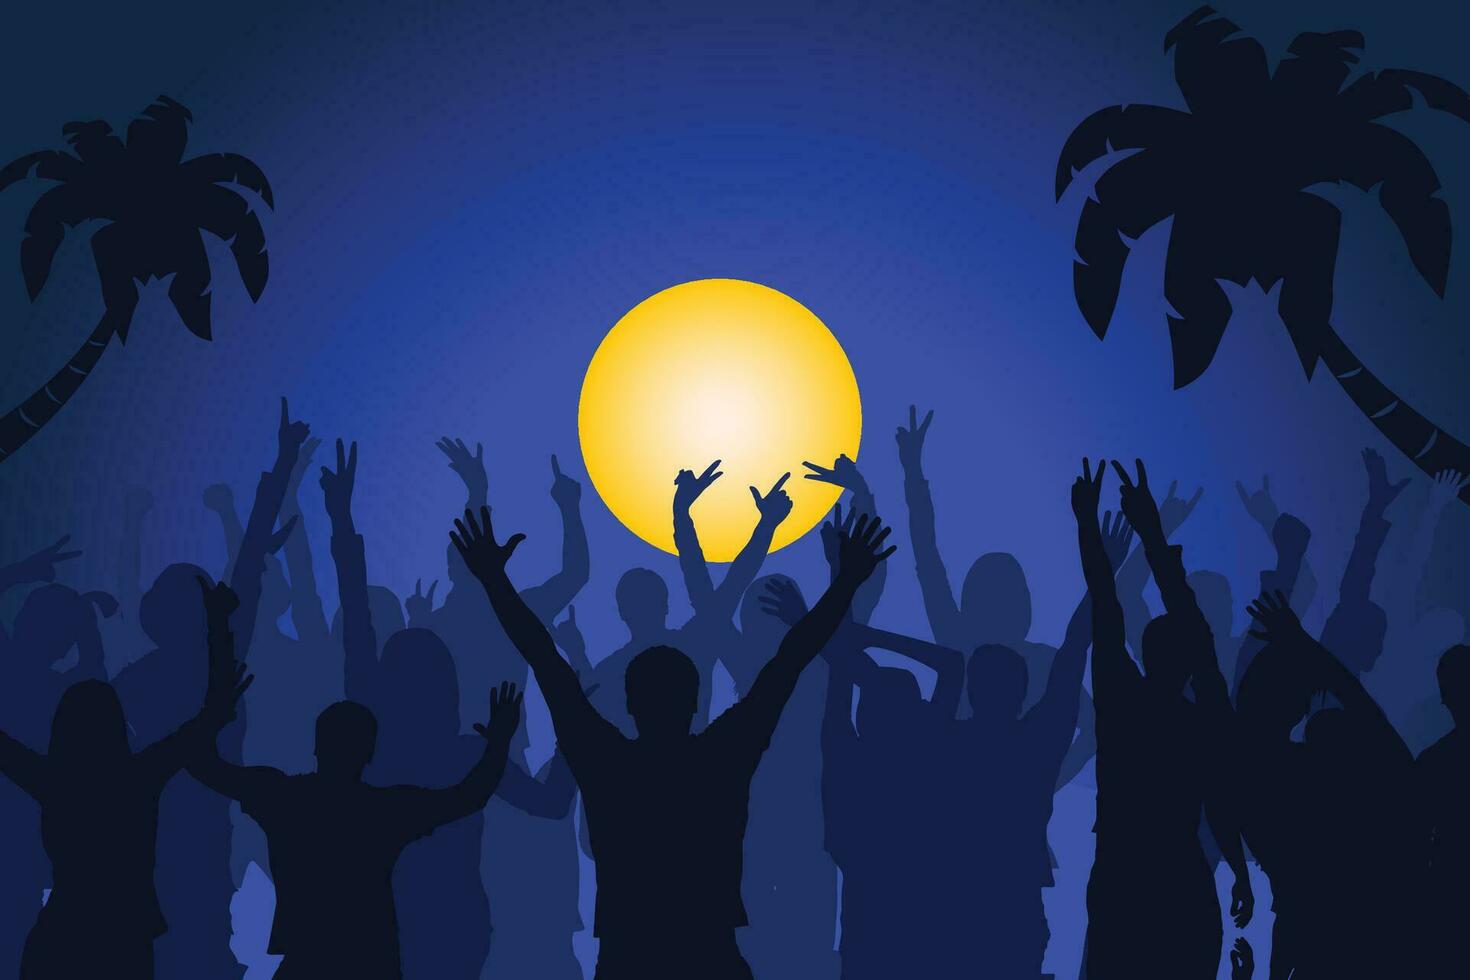 island party at night vector